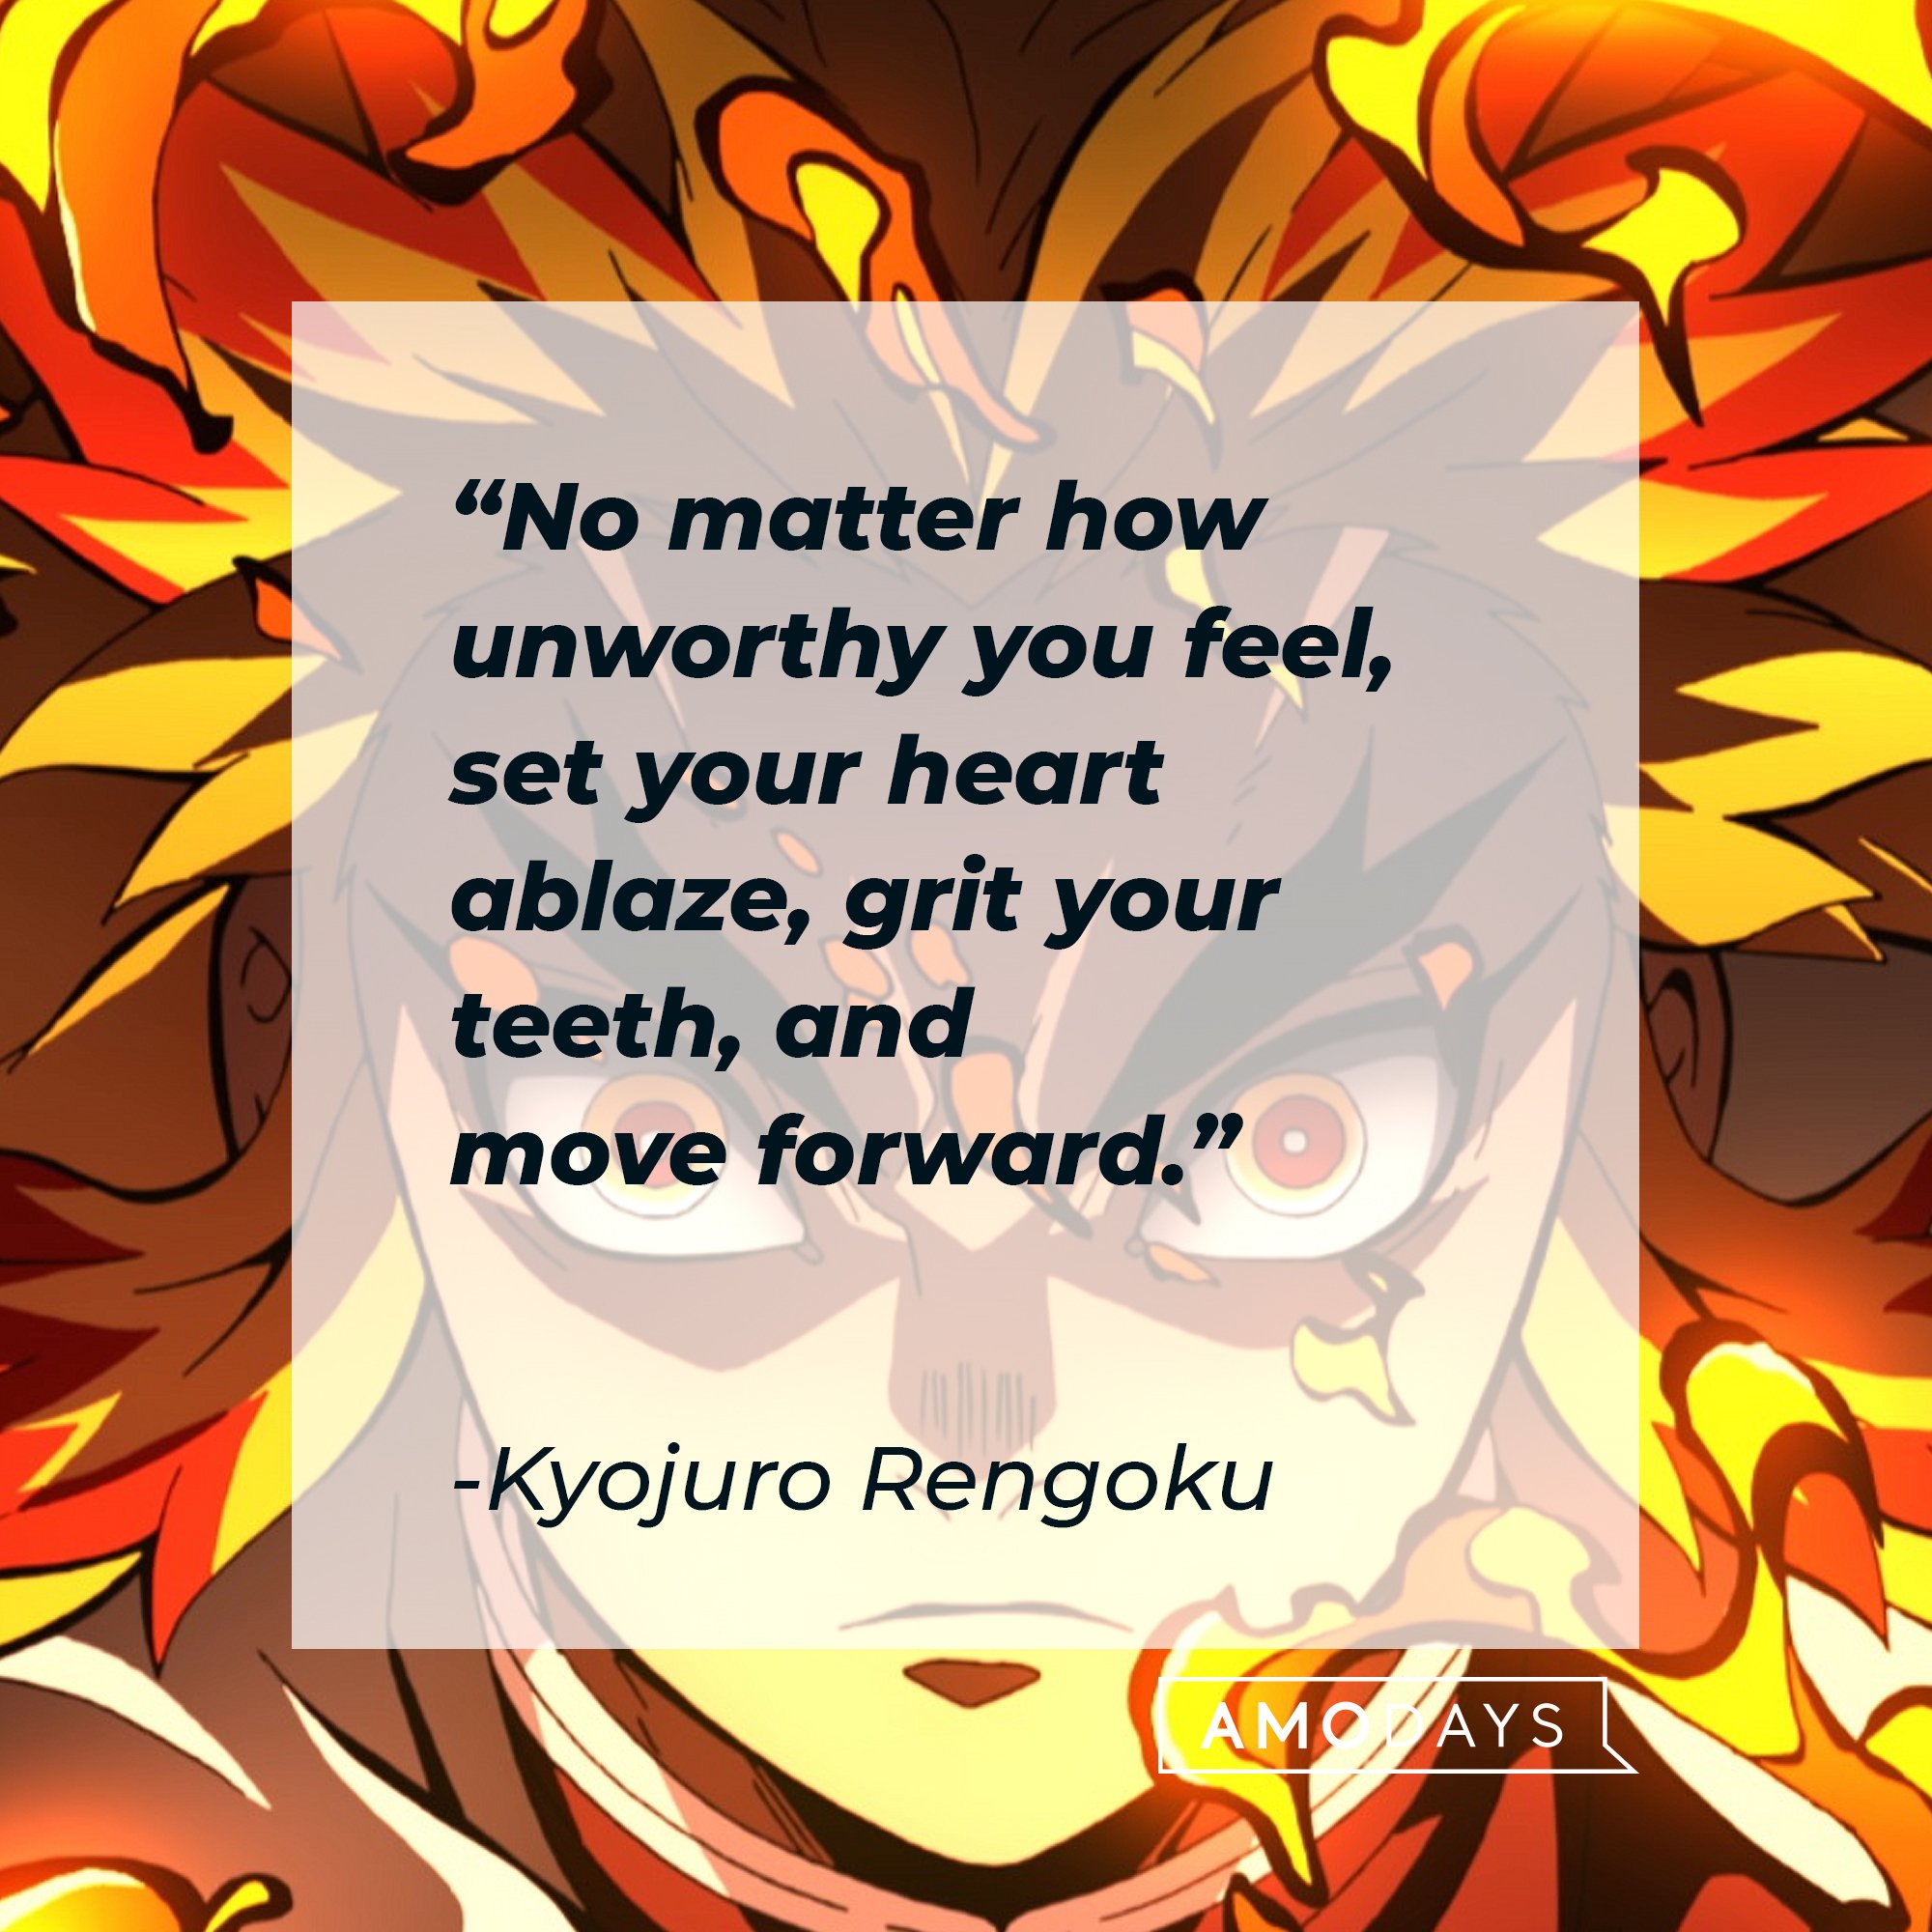 Kyojuro Rengoku’s quote: “No matter how unworthy you feel, set your heart ablaze, grit your teeth, and move forward.” | Image: AmoDays